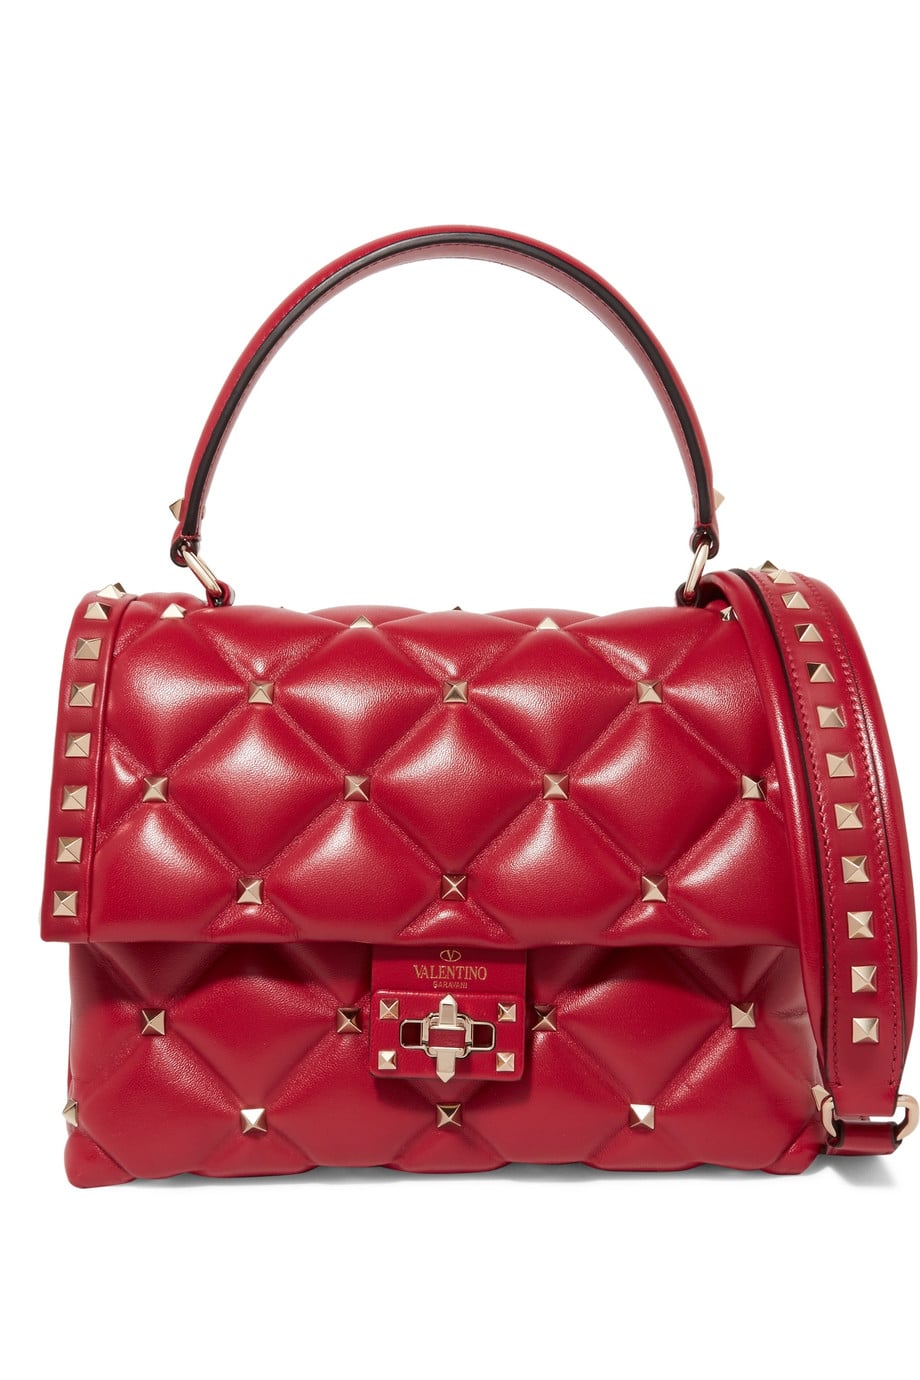 Reese's Bag | Witherspoon Her Name on a $2,875 Valentino Bag, Because Why Not?! POPSUGAR Fashion Photo 4